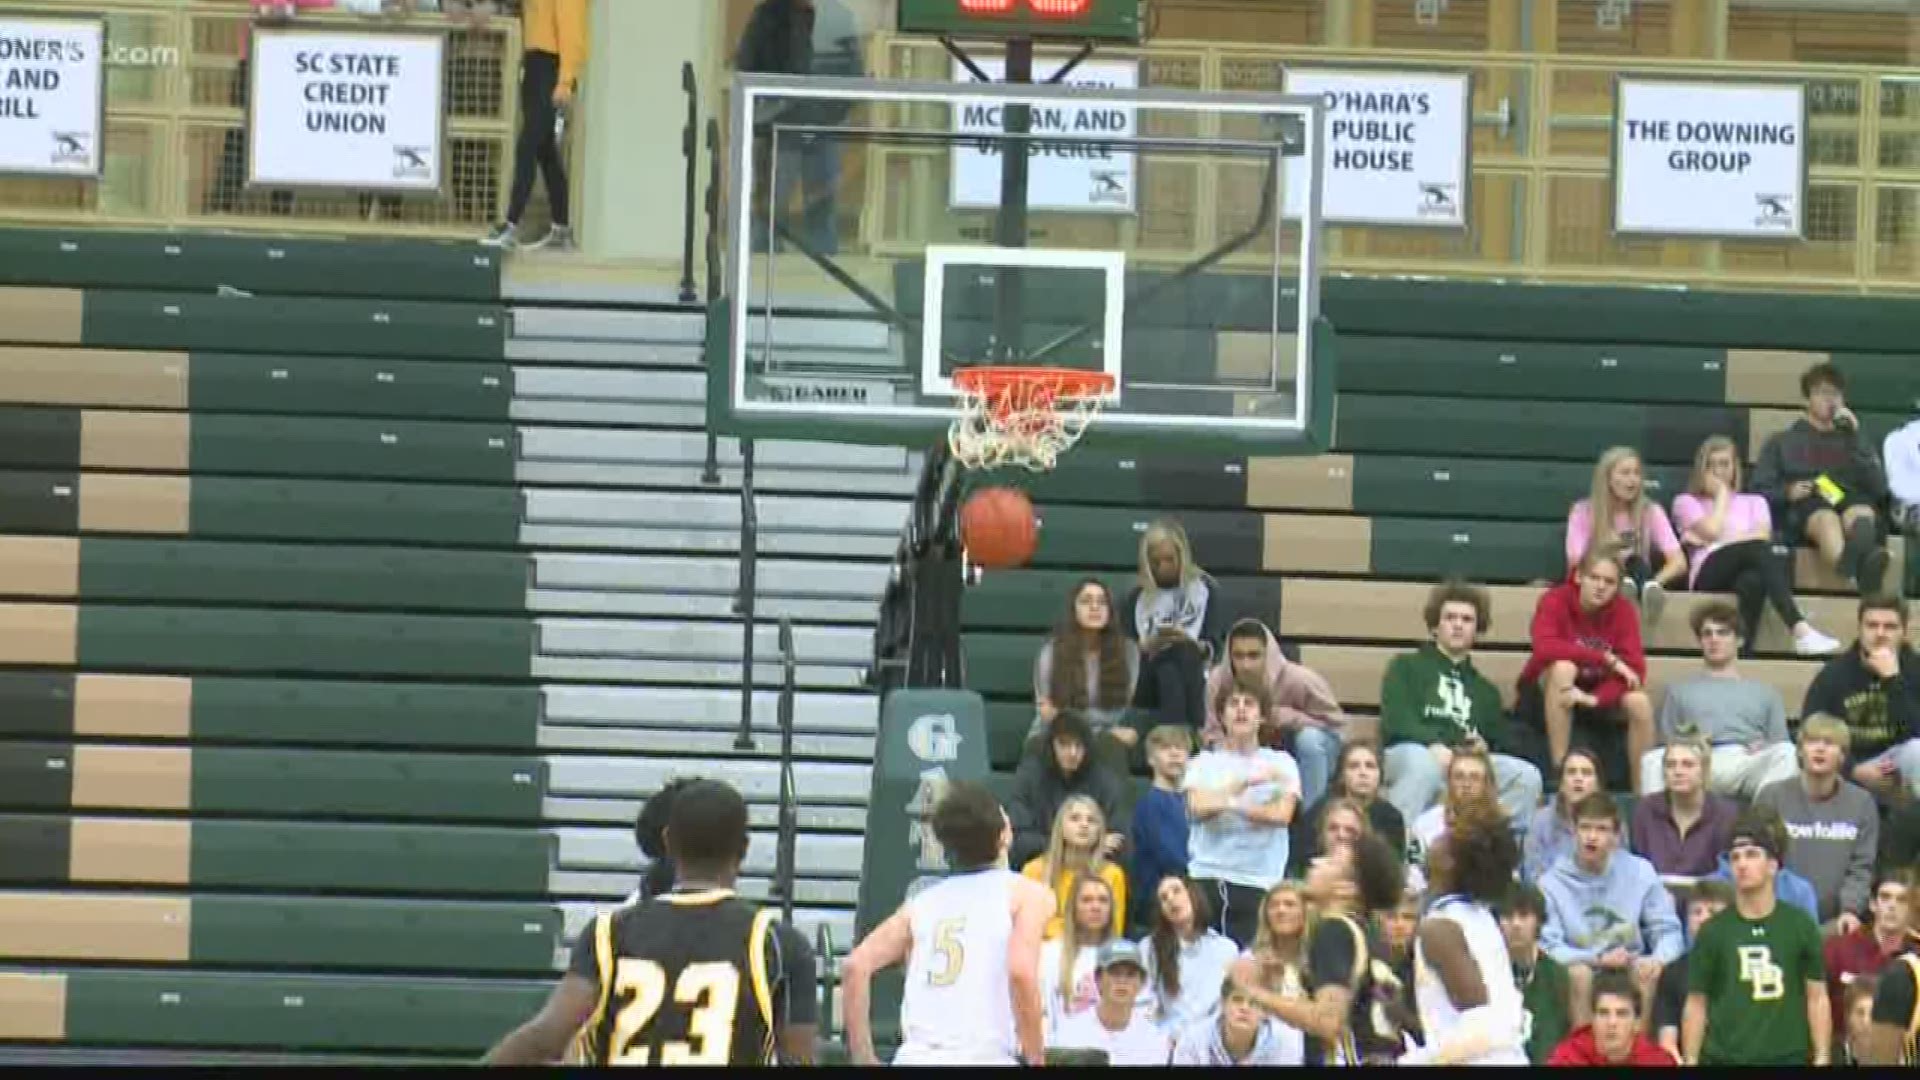 Highlights from Irmo's 50-44 win at River Bluff Tuesday night in 5A action.